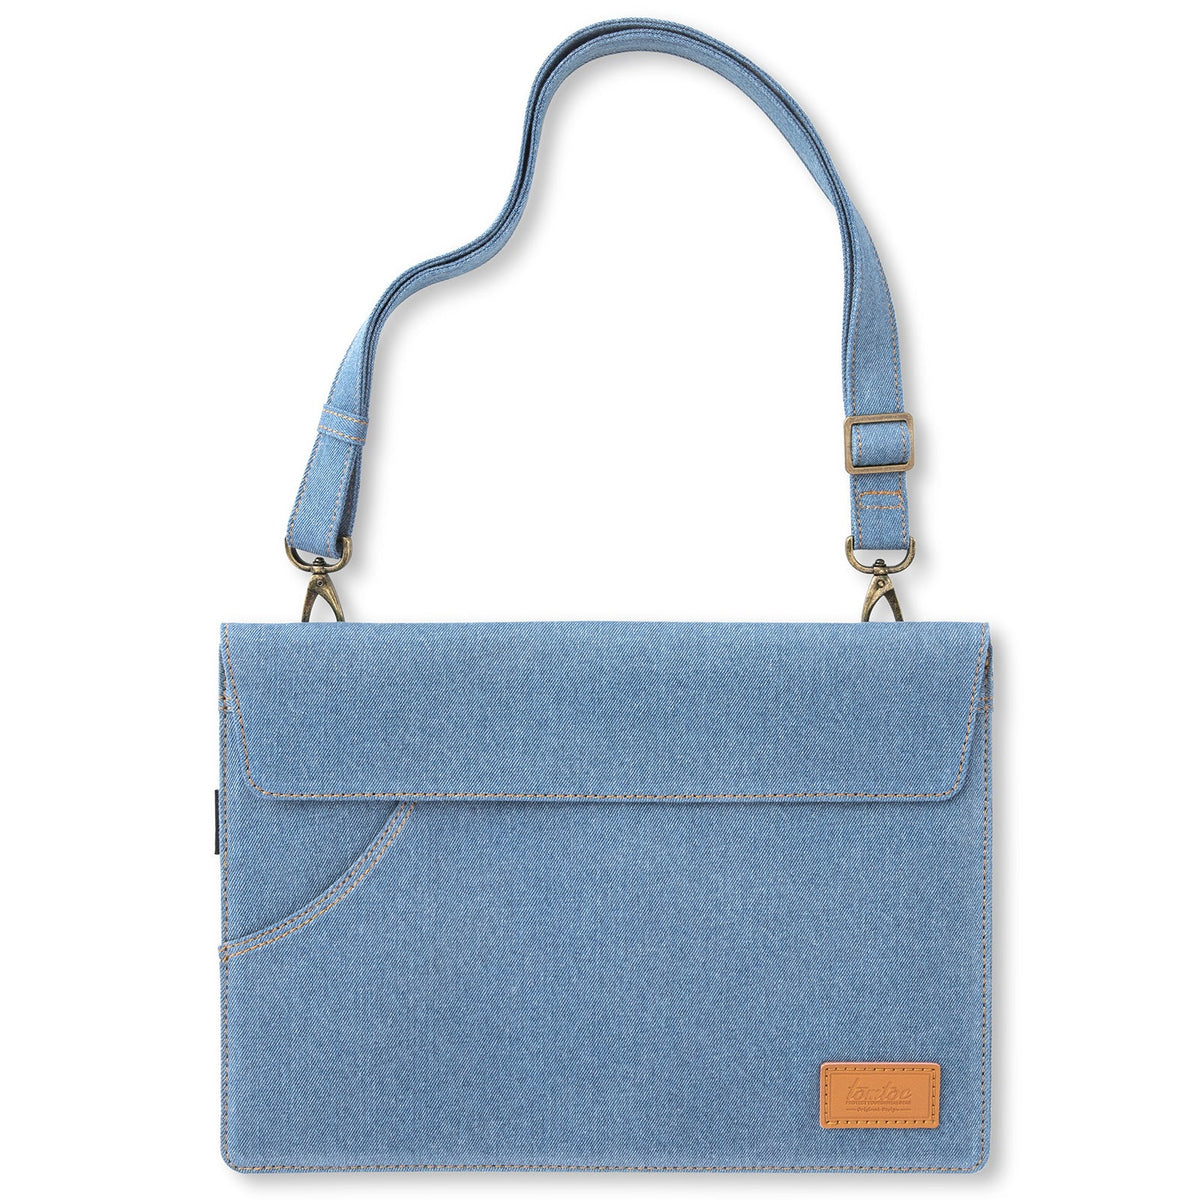 tomtoc Denim Lady Laptop Shoulder Bag For 13-inch MacBook Air And Pro